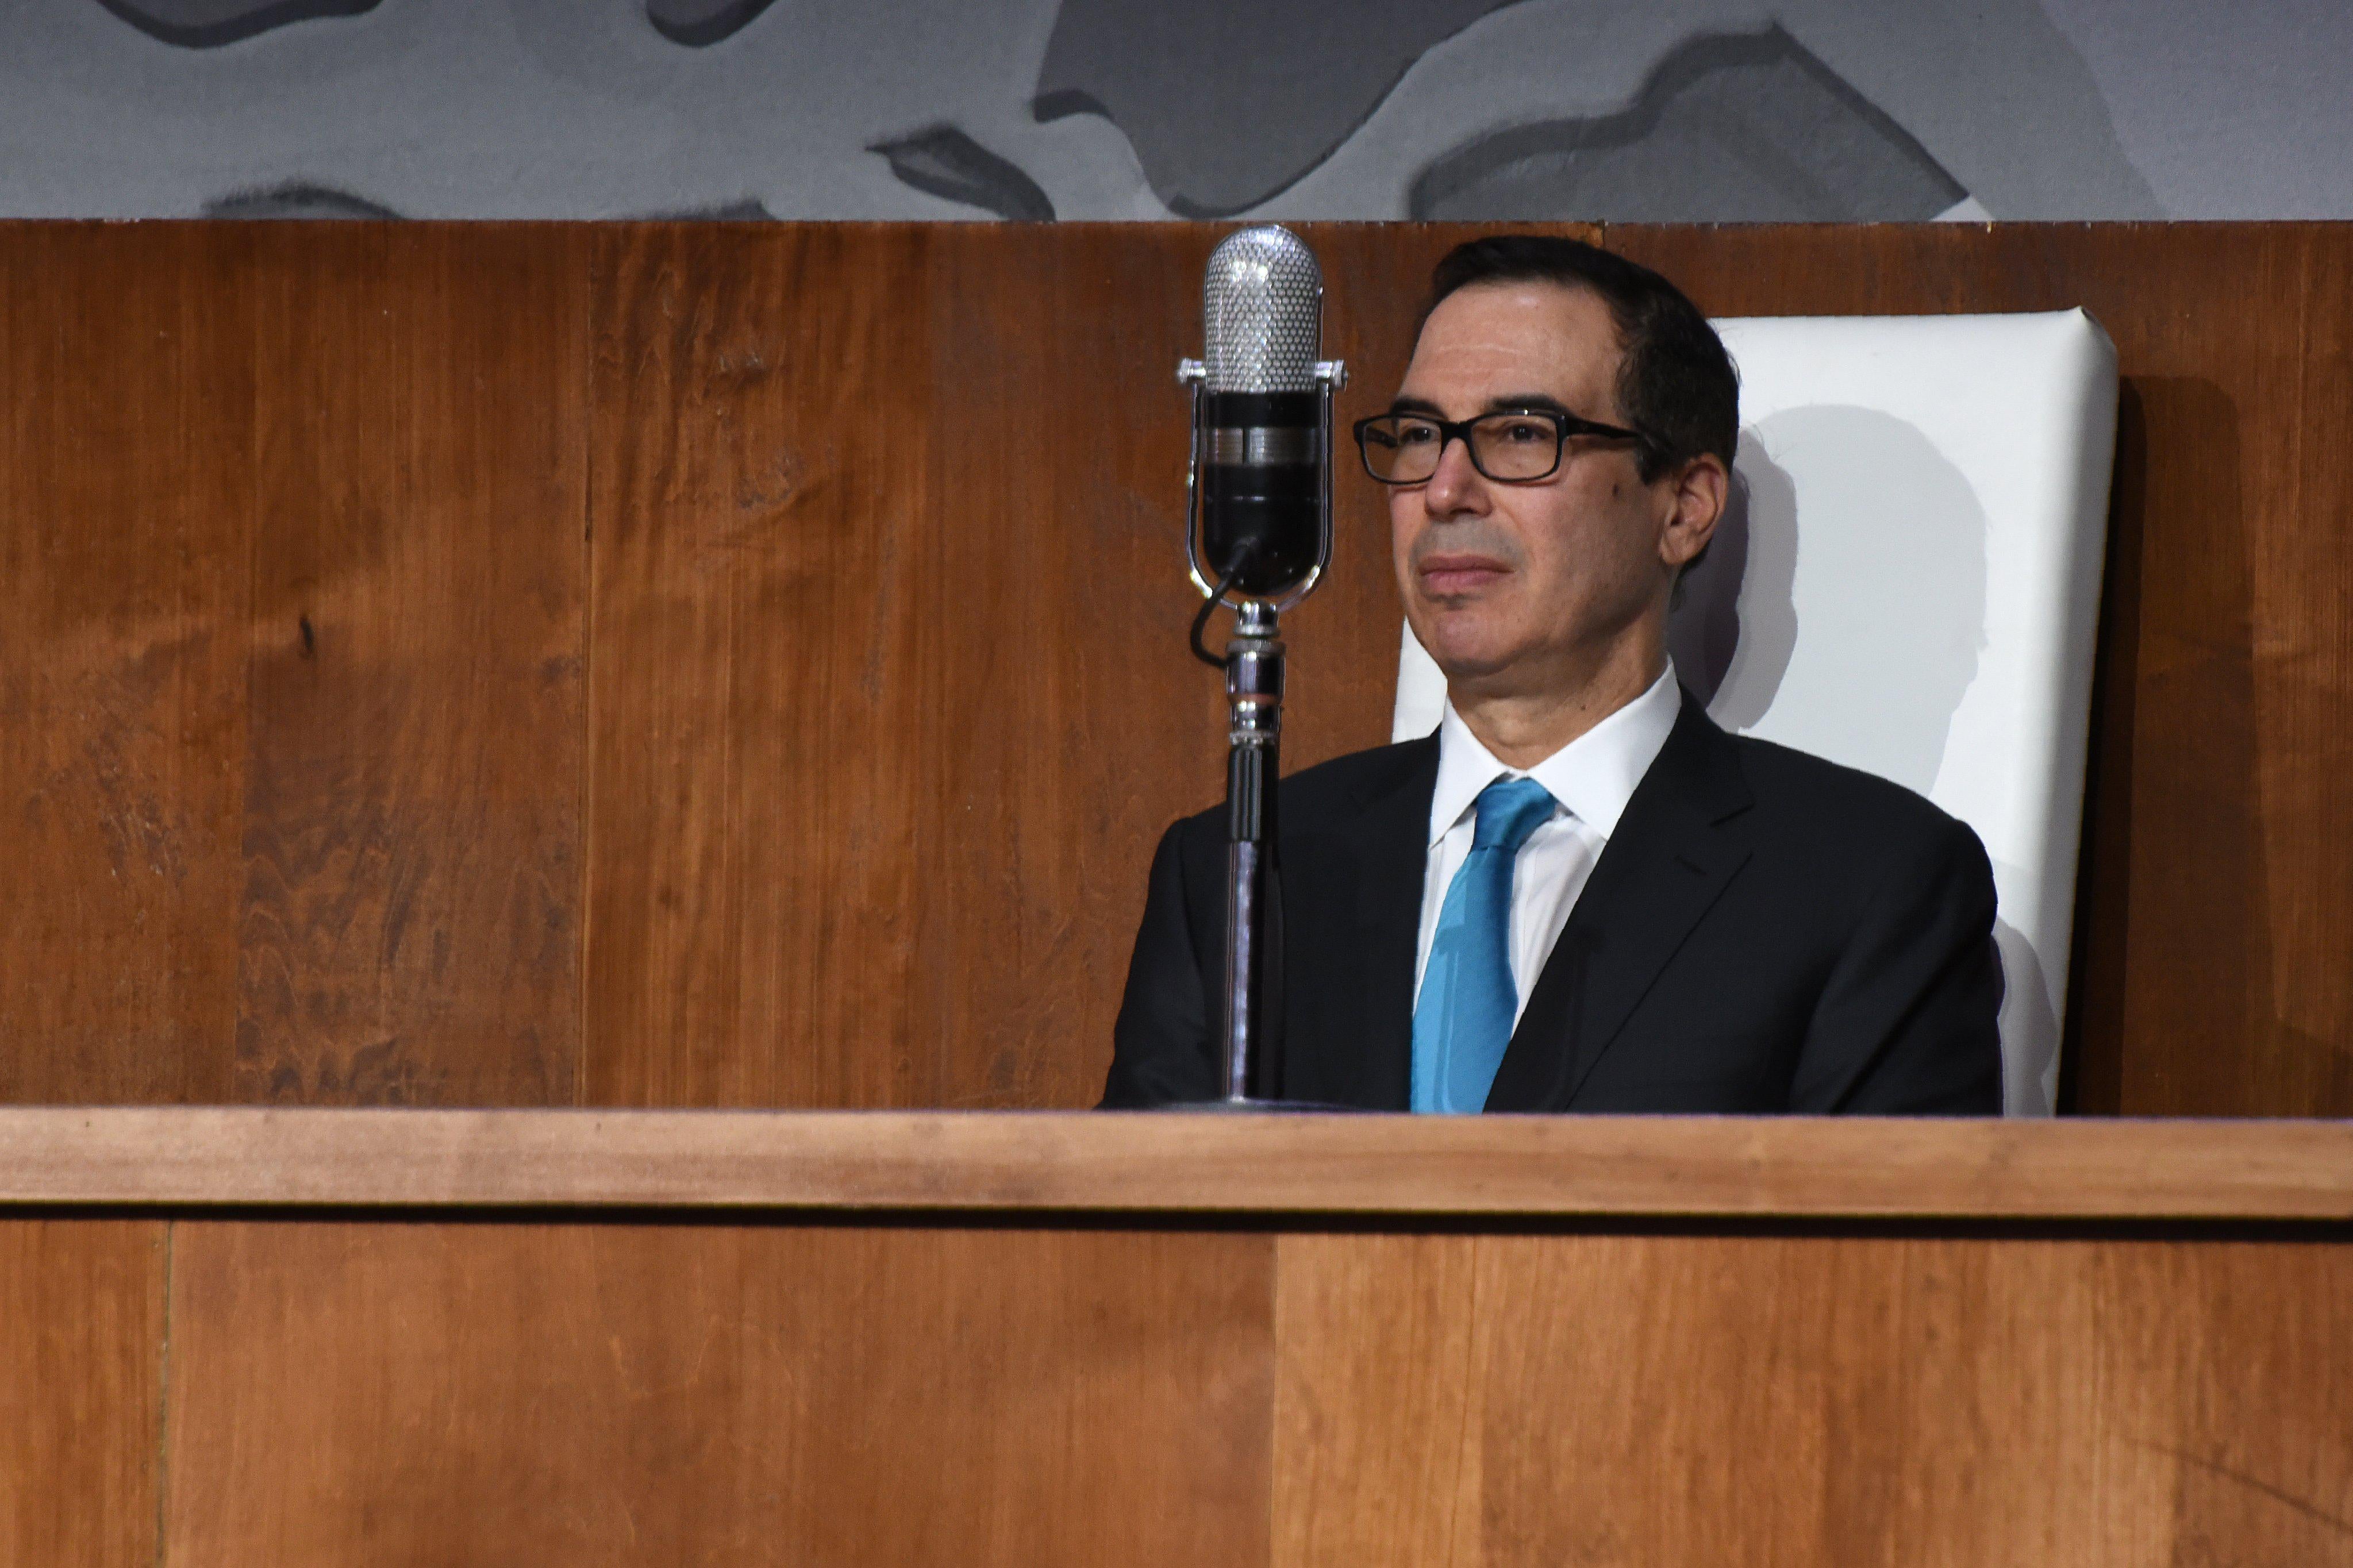 US Treasury Secretary Steven Mnuchin attends the Permanent Mission of Israel to the United Nations event celebrating the 70th anniversary of the UN vote calling for 'the establishment of a Jewish State in the Land of Israel', at Queens Museum on November 28, 2017 in New York. / AFP PHOTO / TIMOTHY A. CLARY        (Photo credit should read TIMOTHY A. CLARY/AFP/Getty Images)